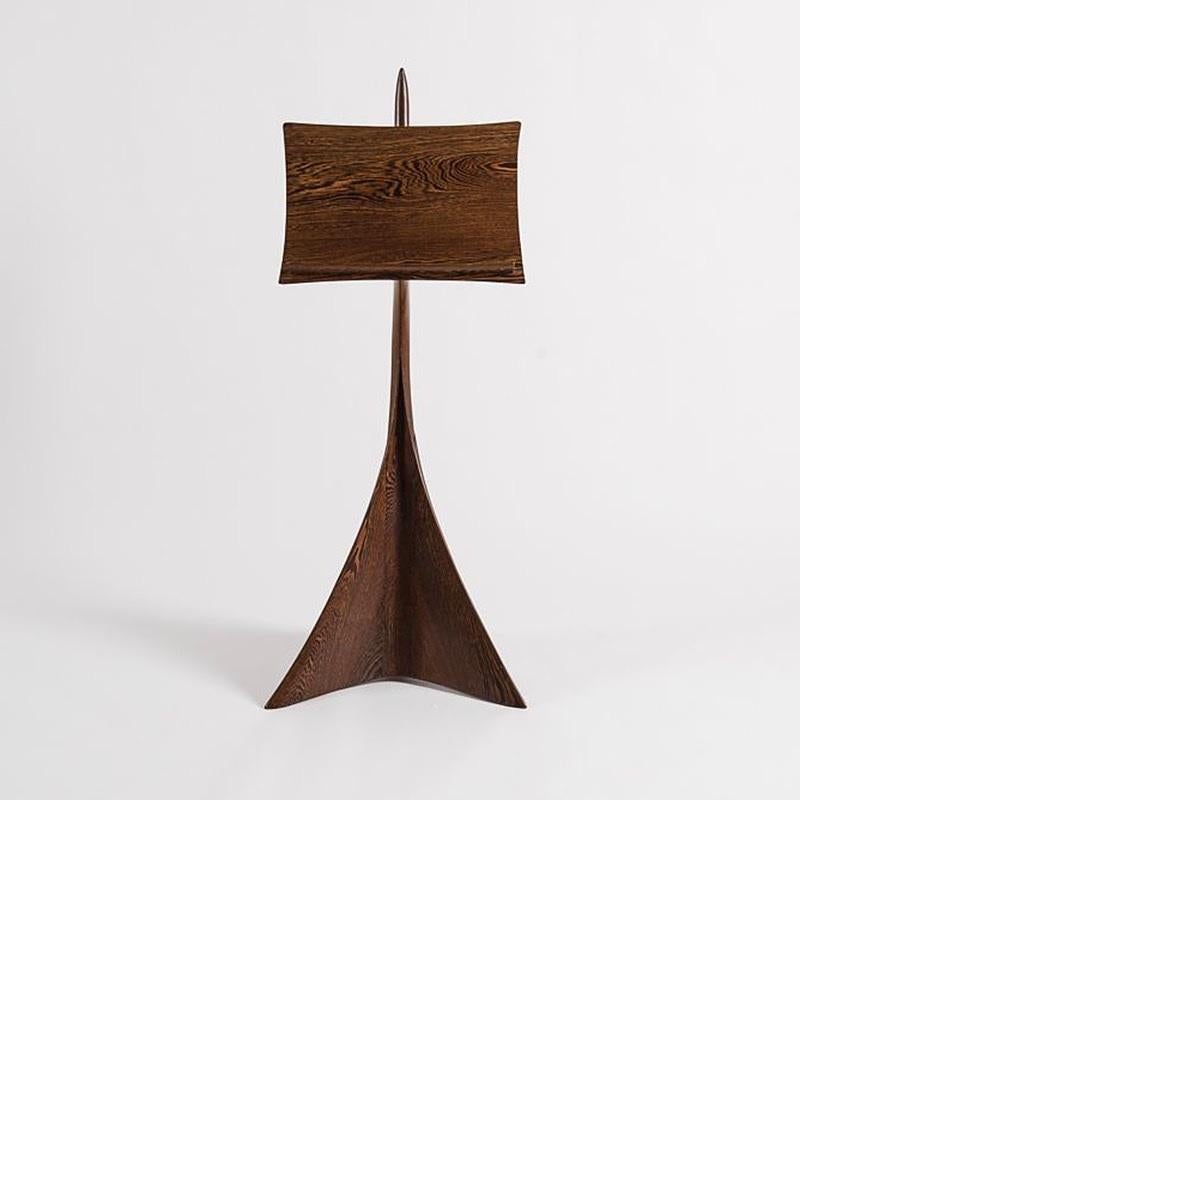 An American carved wood music stand by Michael Coffey. This piece represents an evolution in sculptor Michael Coffey's process. Always seeking functionality and beauty in his designs, Coffey attempted perfection in the adjusting mechanism on this